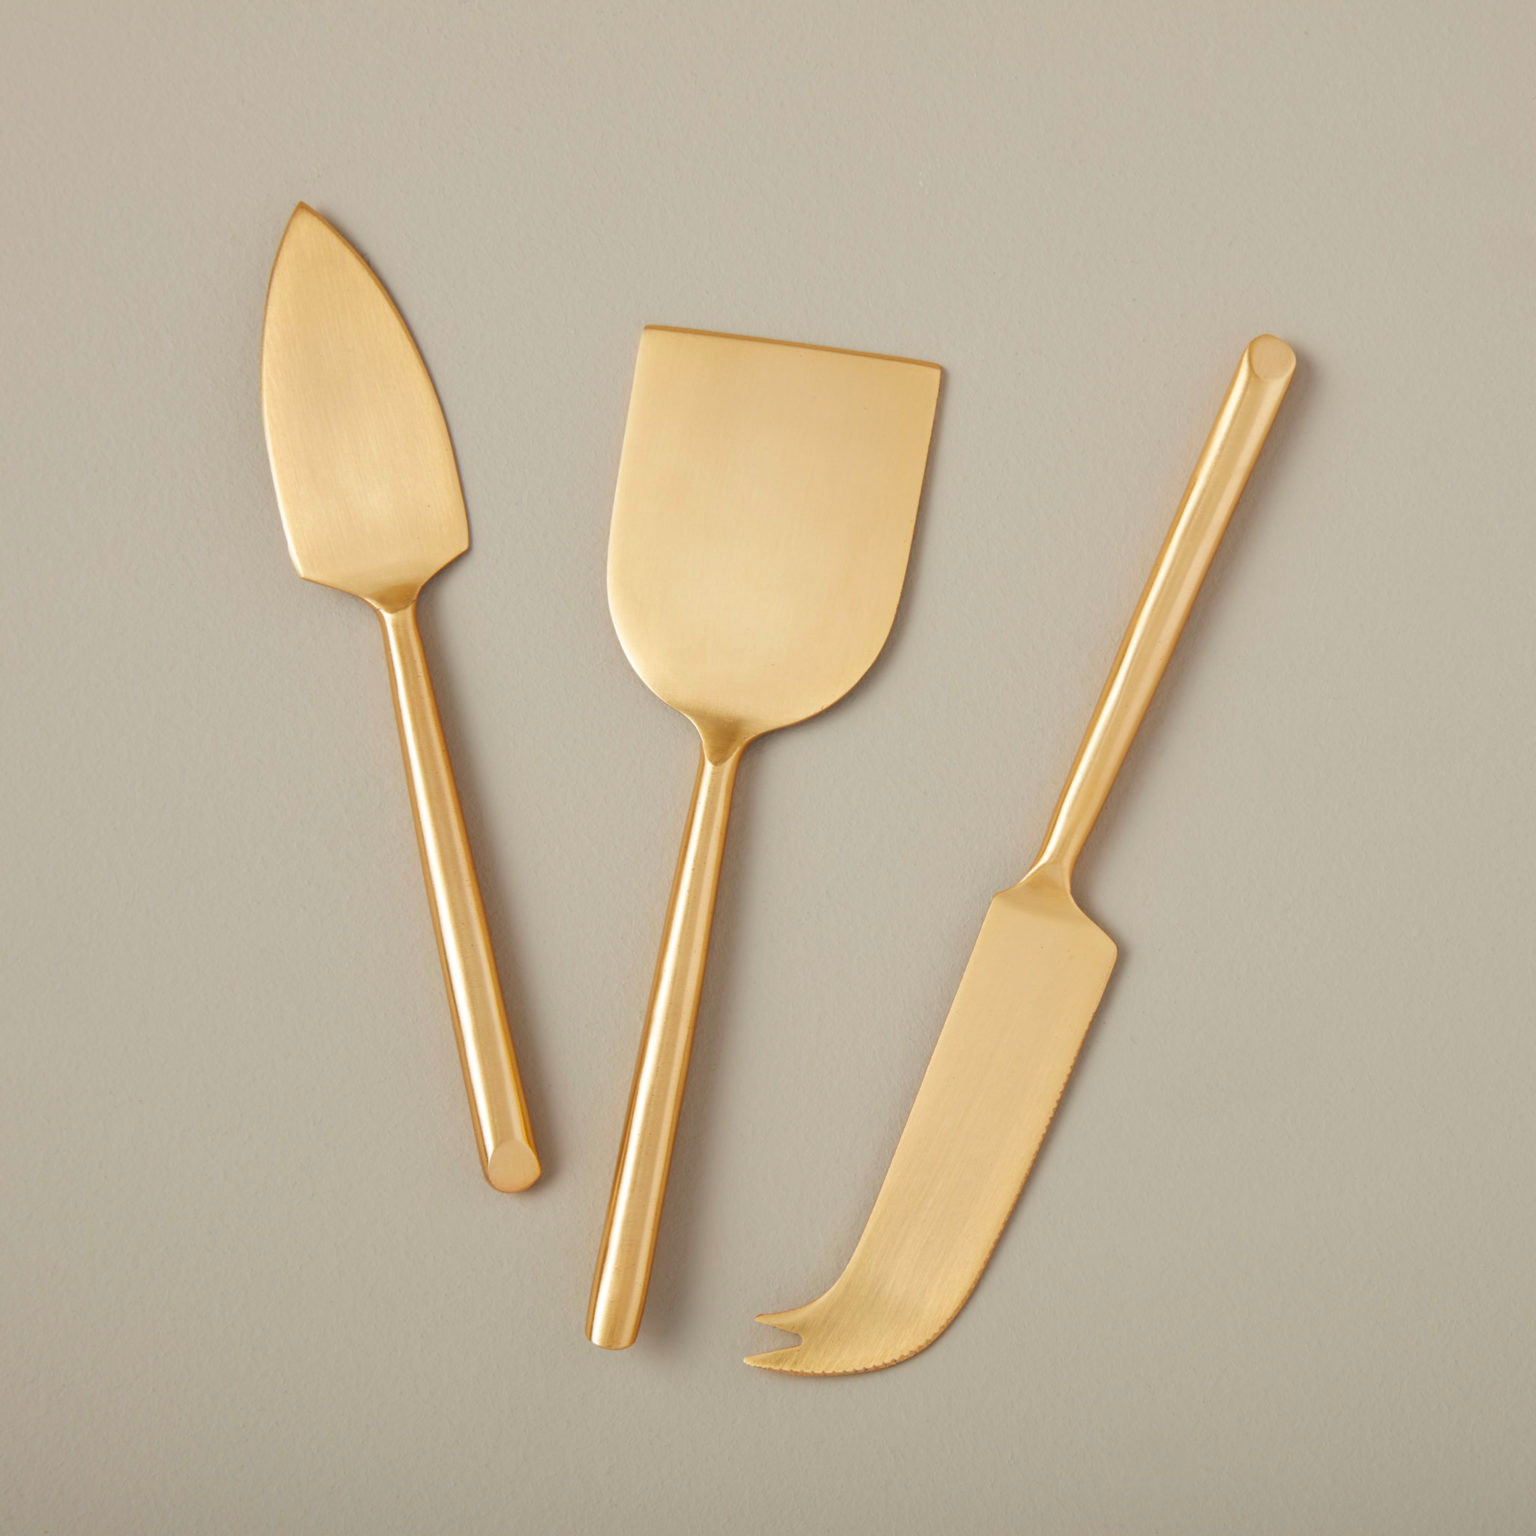 Image of Matte Gold Cheese Servers, Set of 3